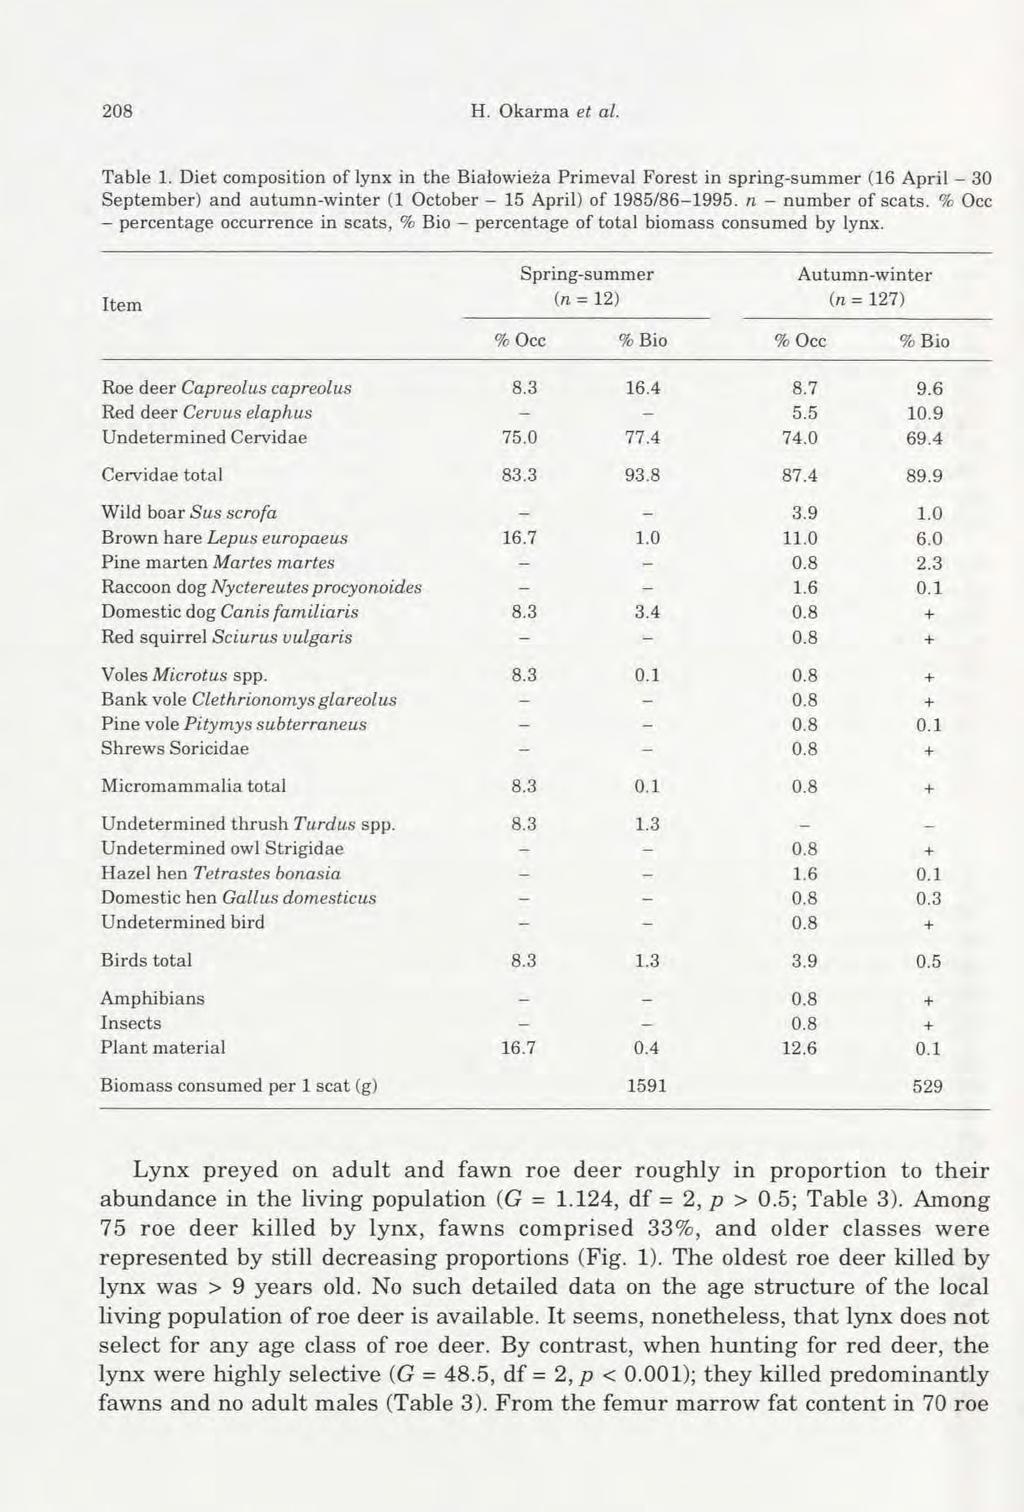 208 H. Okarraa et al. Table 1. Diet composition of lynx in the Białowieża Primeval Forest in spring-summer (16 April - 30 September) and autumn-winter (1 October - 15 April) of 1985/86-1995.